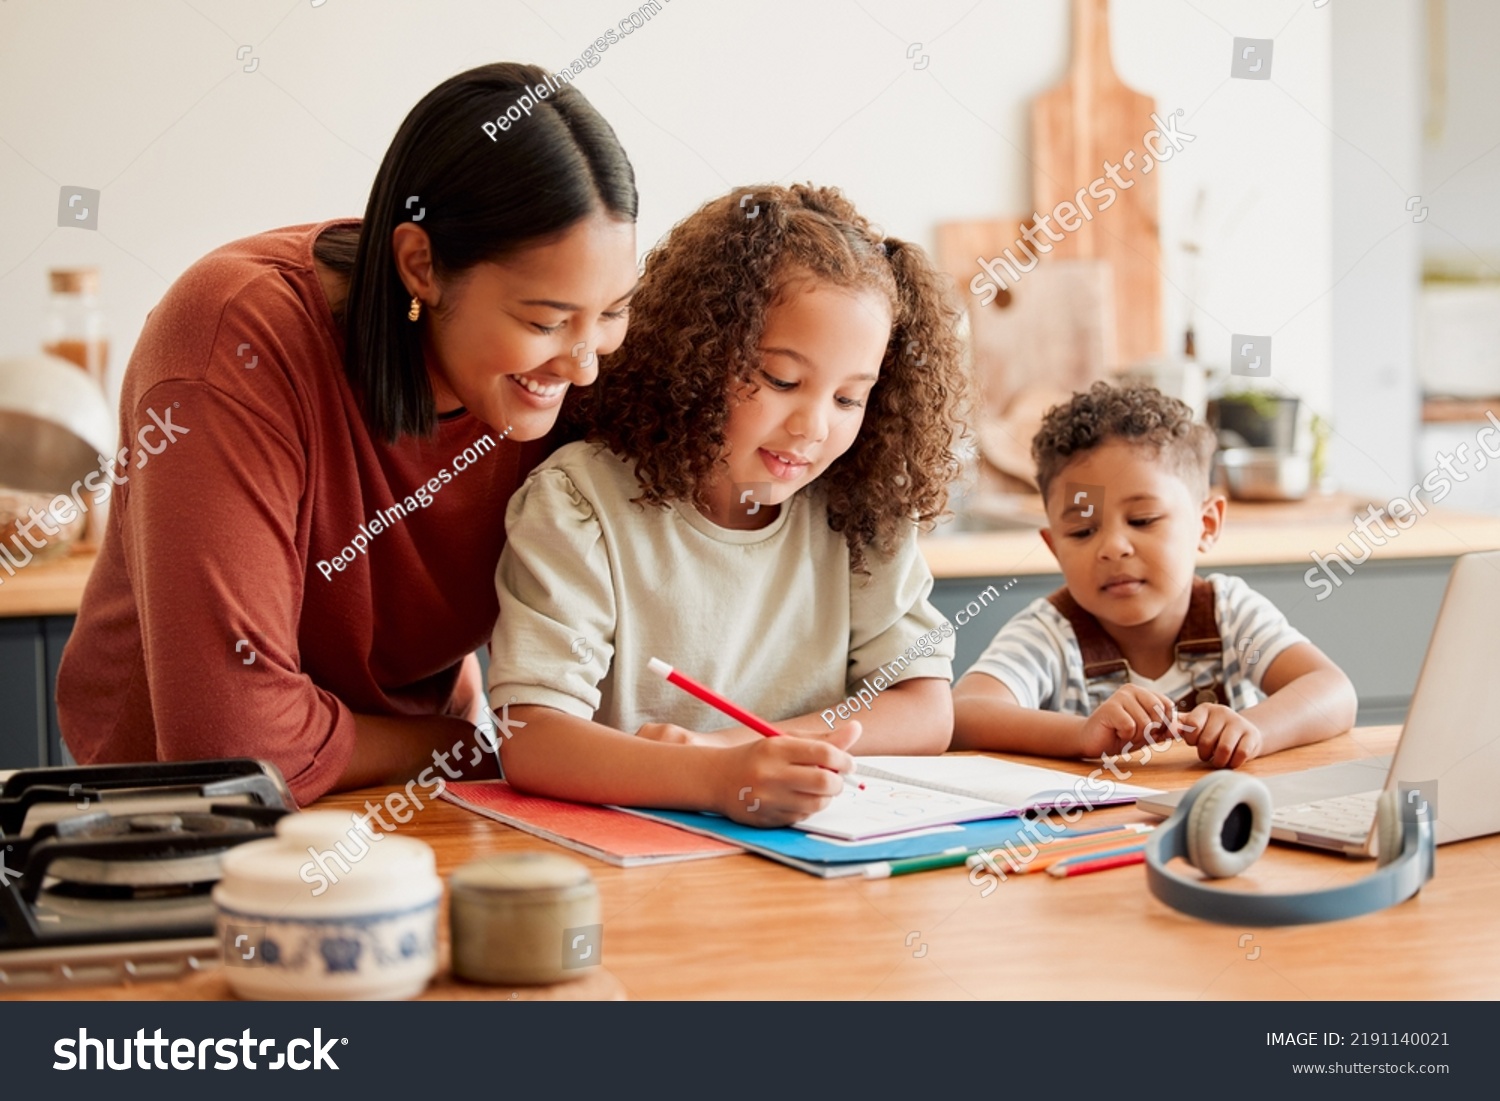 Mother teaching, learning and education with child studying, doing homework or writing in book during an at home lesson or homeschooling. Daughter in early childhood development enjoying fun #2191140021